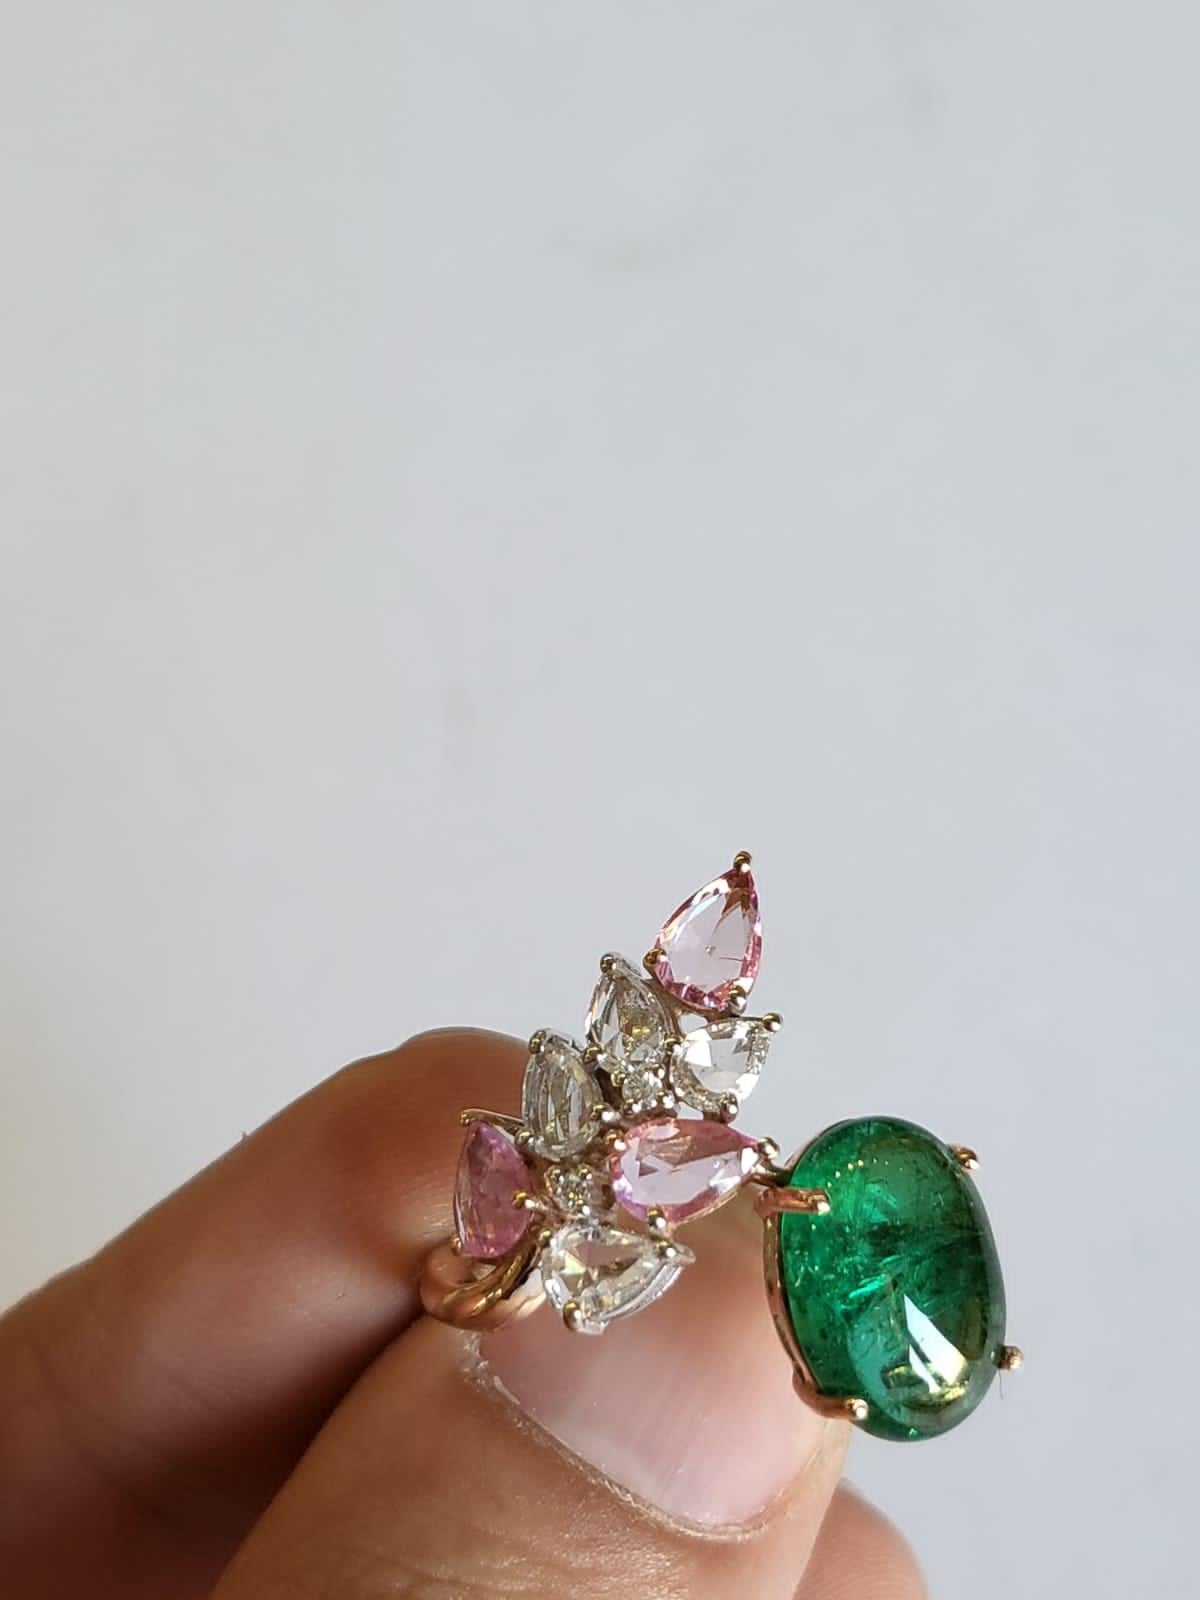 Modern 4.27 carats Zambian Emerald Cabochon, Pink Sapphires & Diamonds Cocktail Ring For Sale